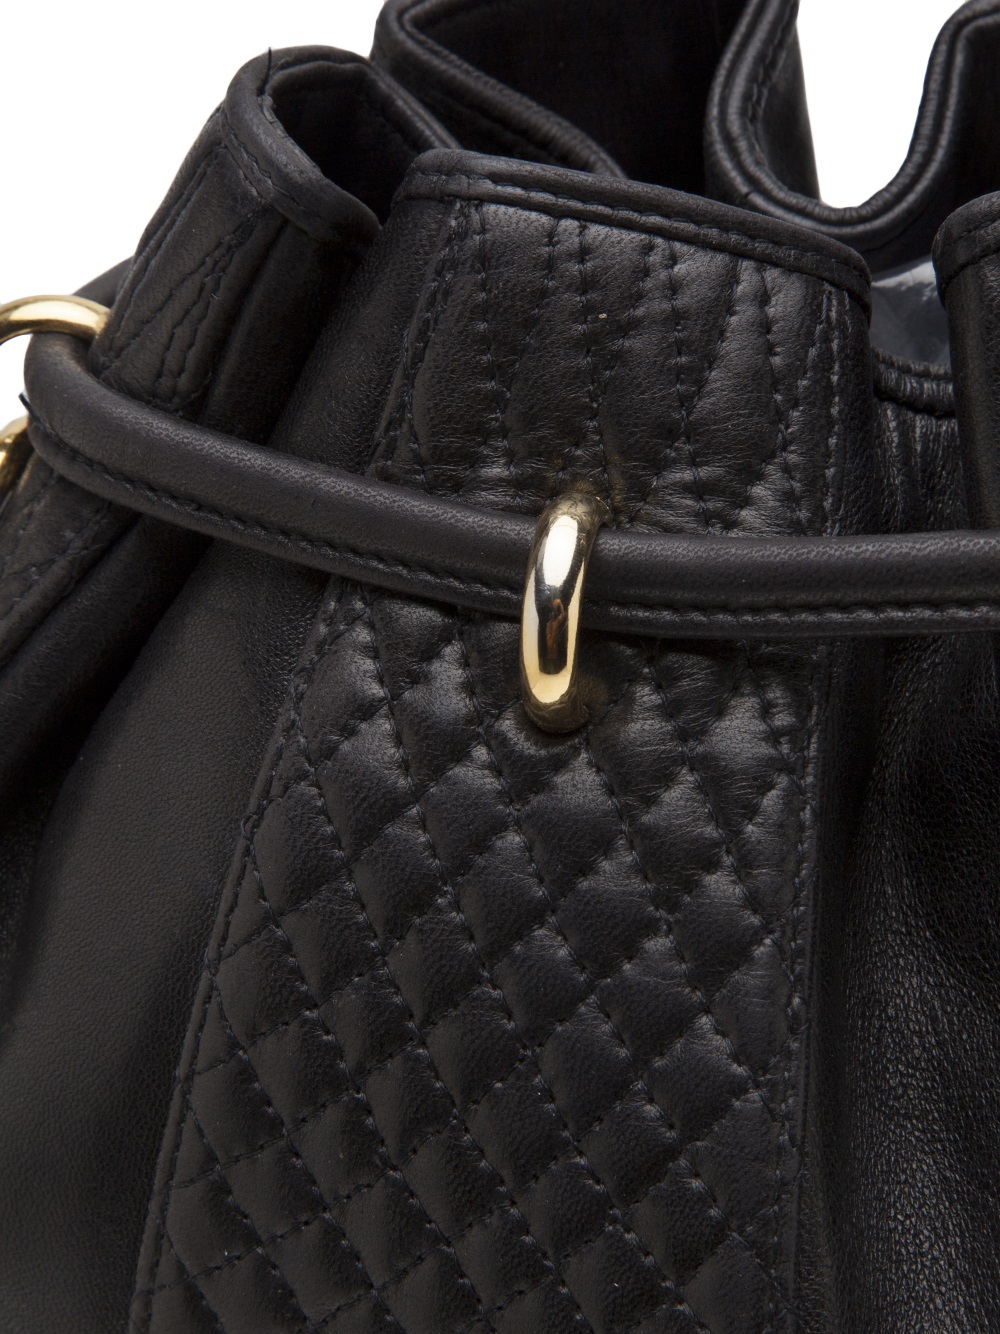 Bally, a quilted black leather bag. - Bukowskis